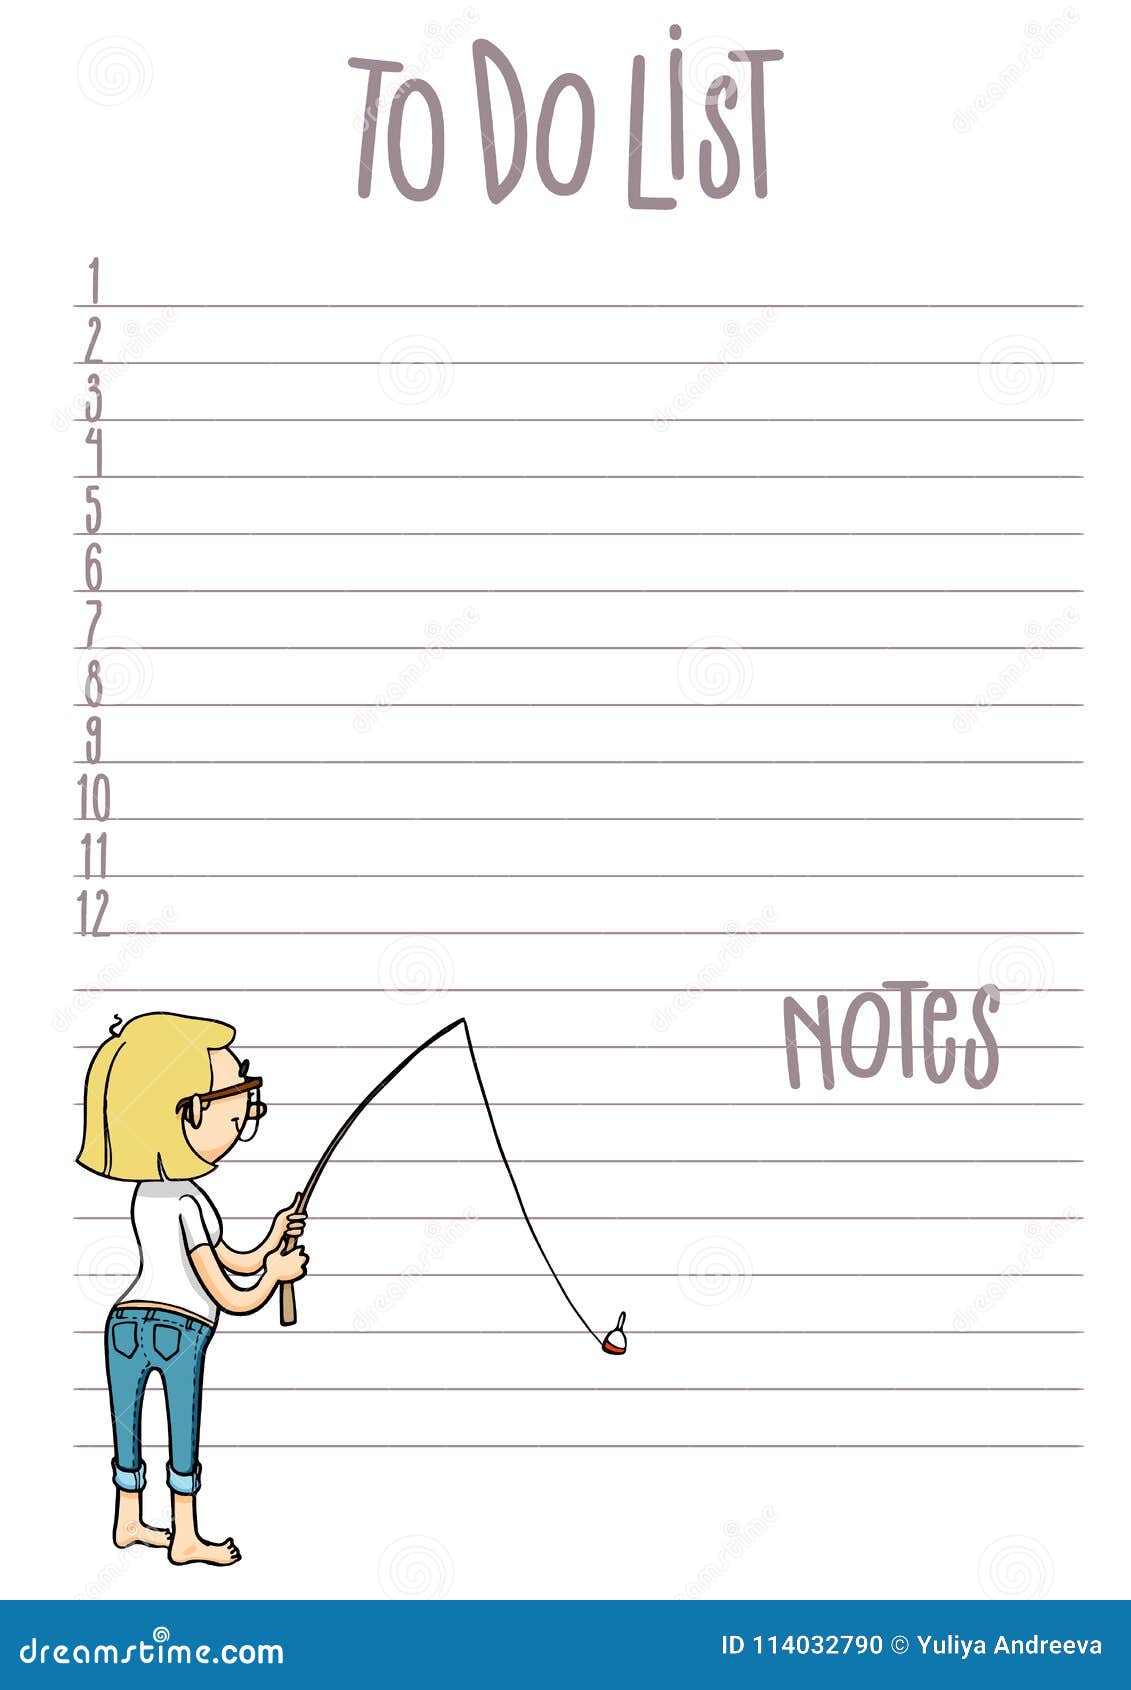 to-do-list-daily-weekly-monthly-planner-stock-illustration